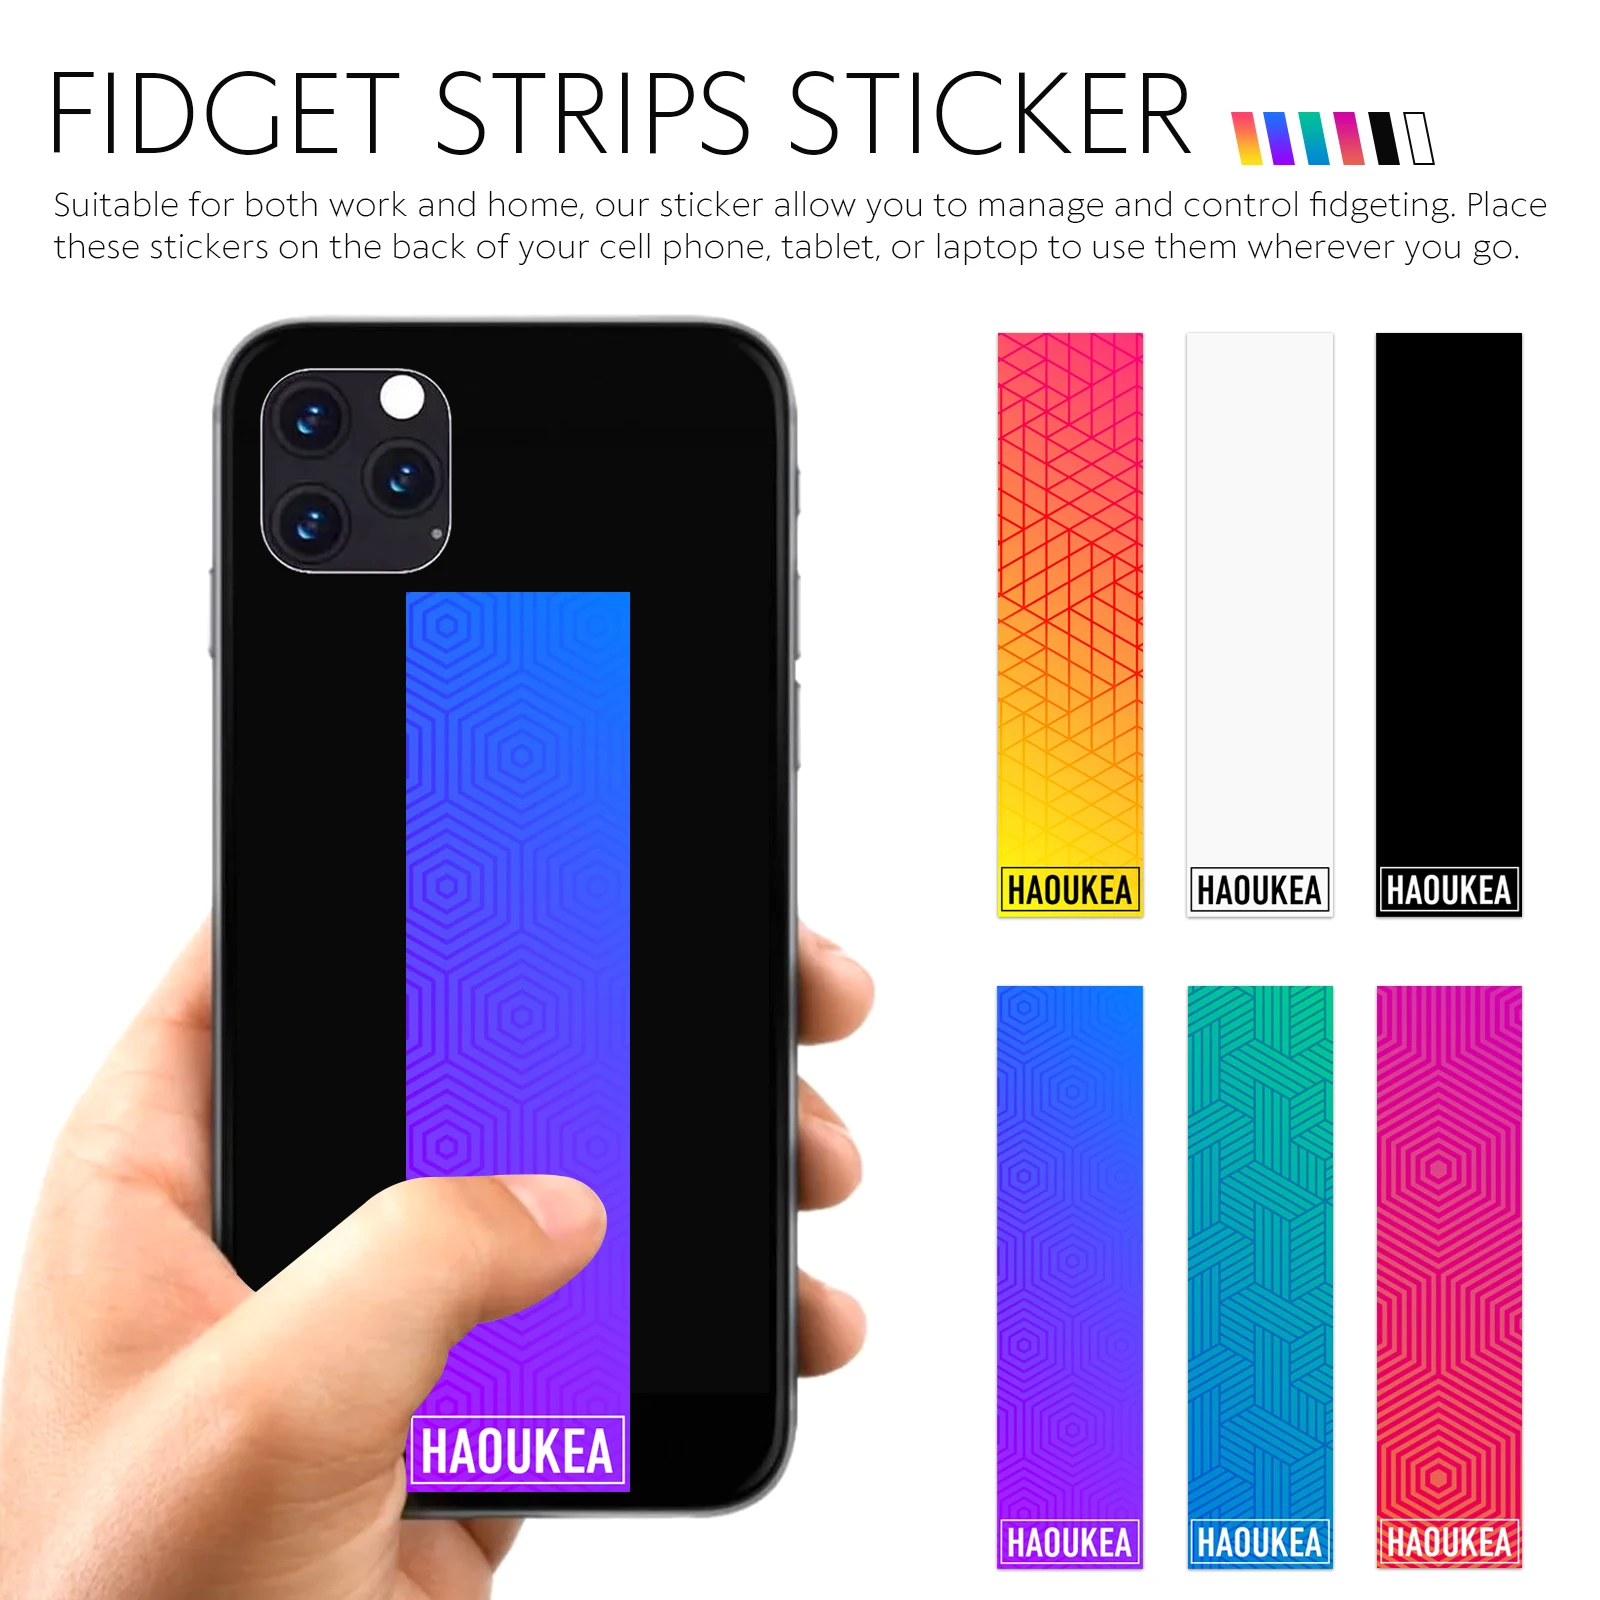 Fidget Strips Discreet Anti Stress Tactile Rough Sensory Strips Ideal Desk Fidget Anti Stress Toys Anxiety Relief